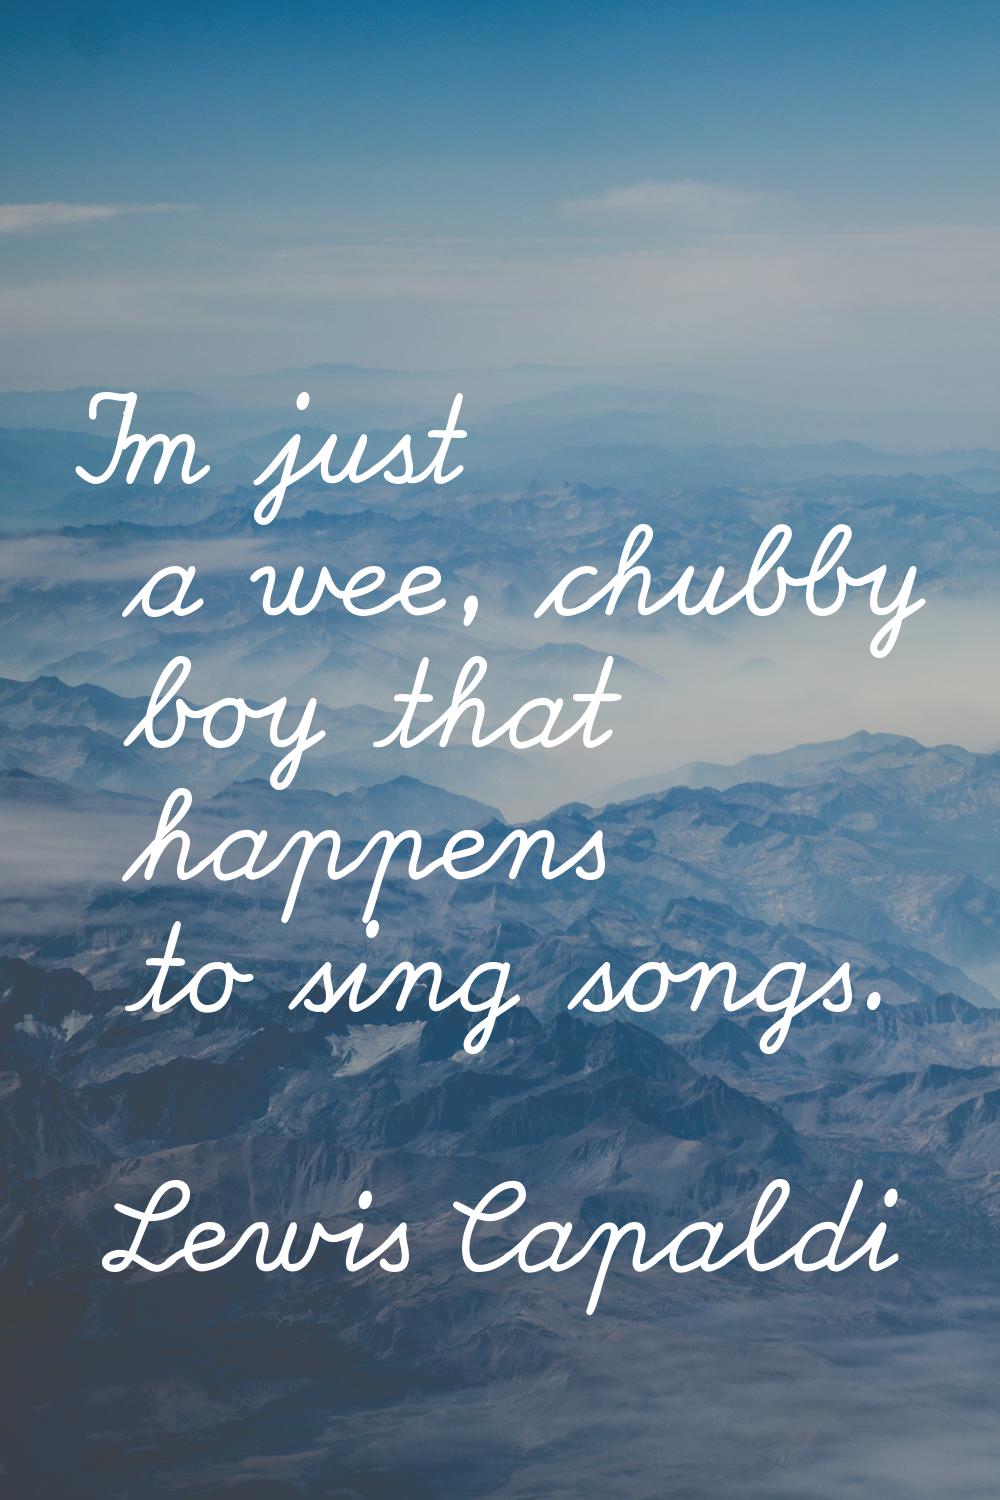 I'm just a wee, chubby boy that happens to sing songs.